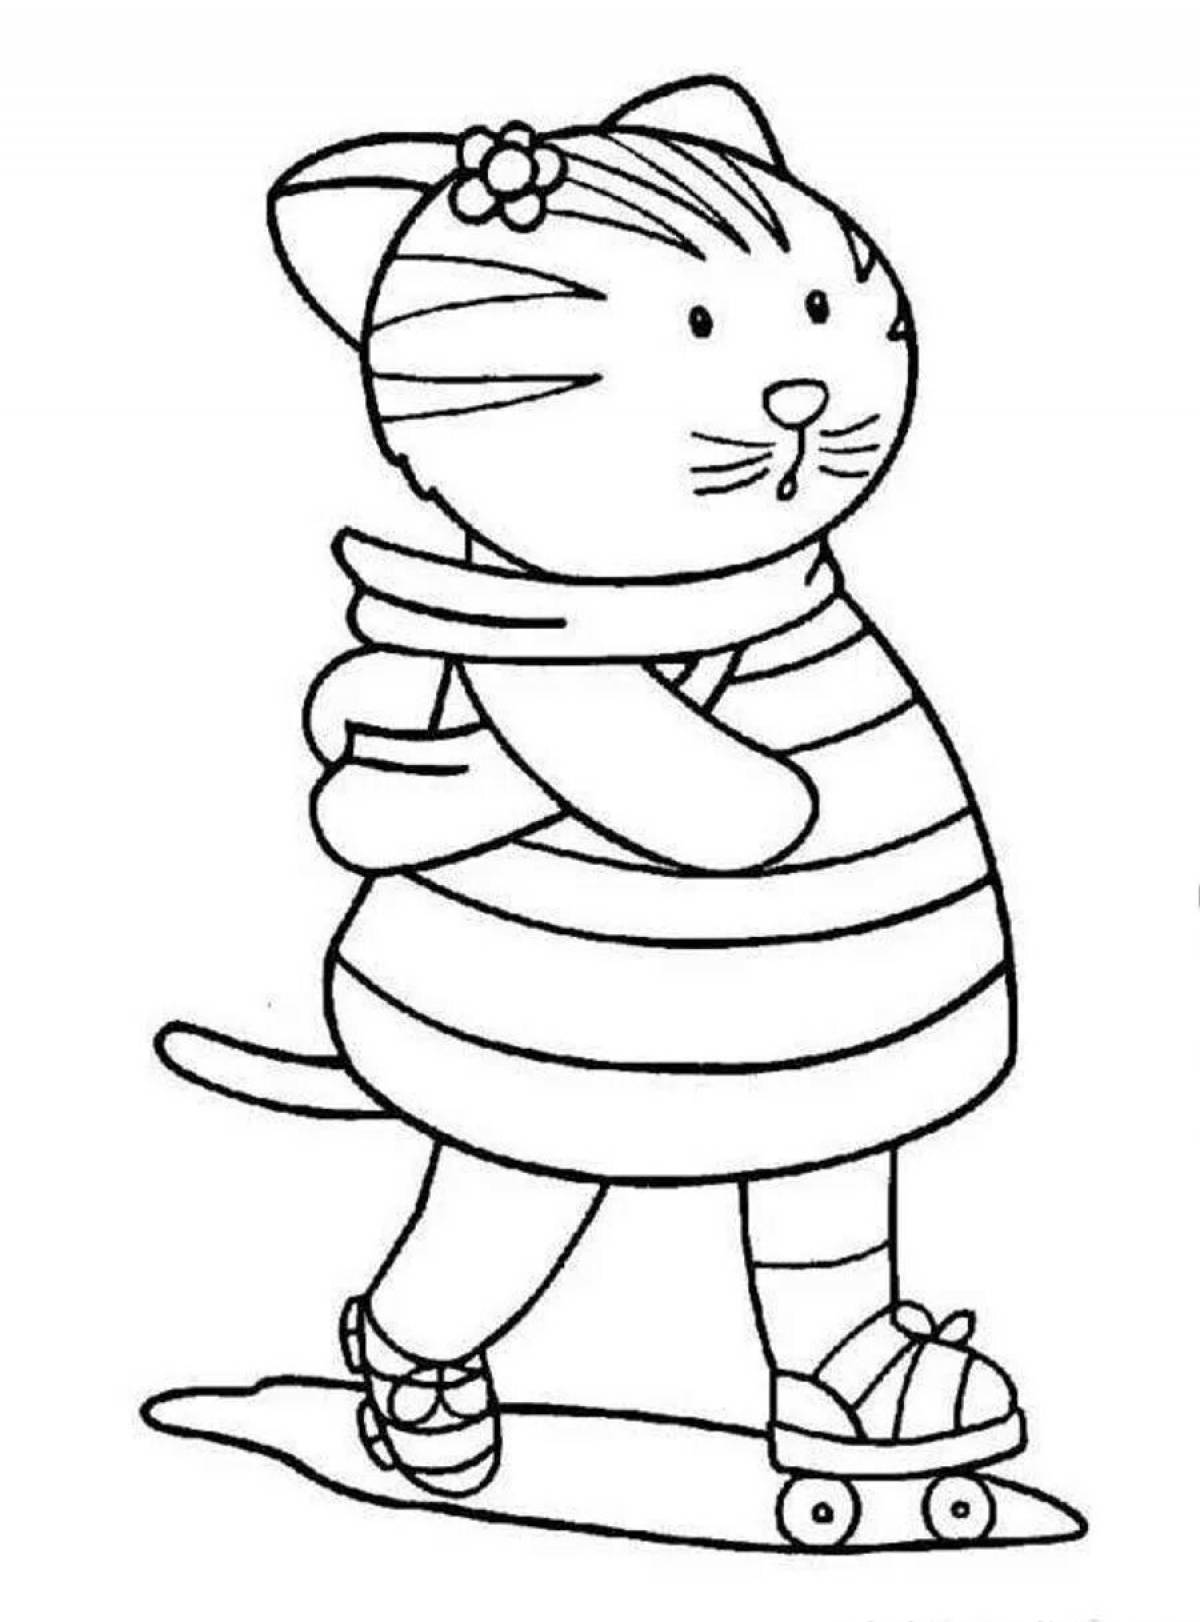 Attraction bassik toy coloring page